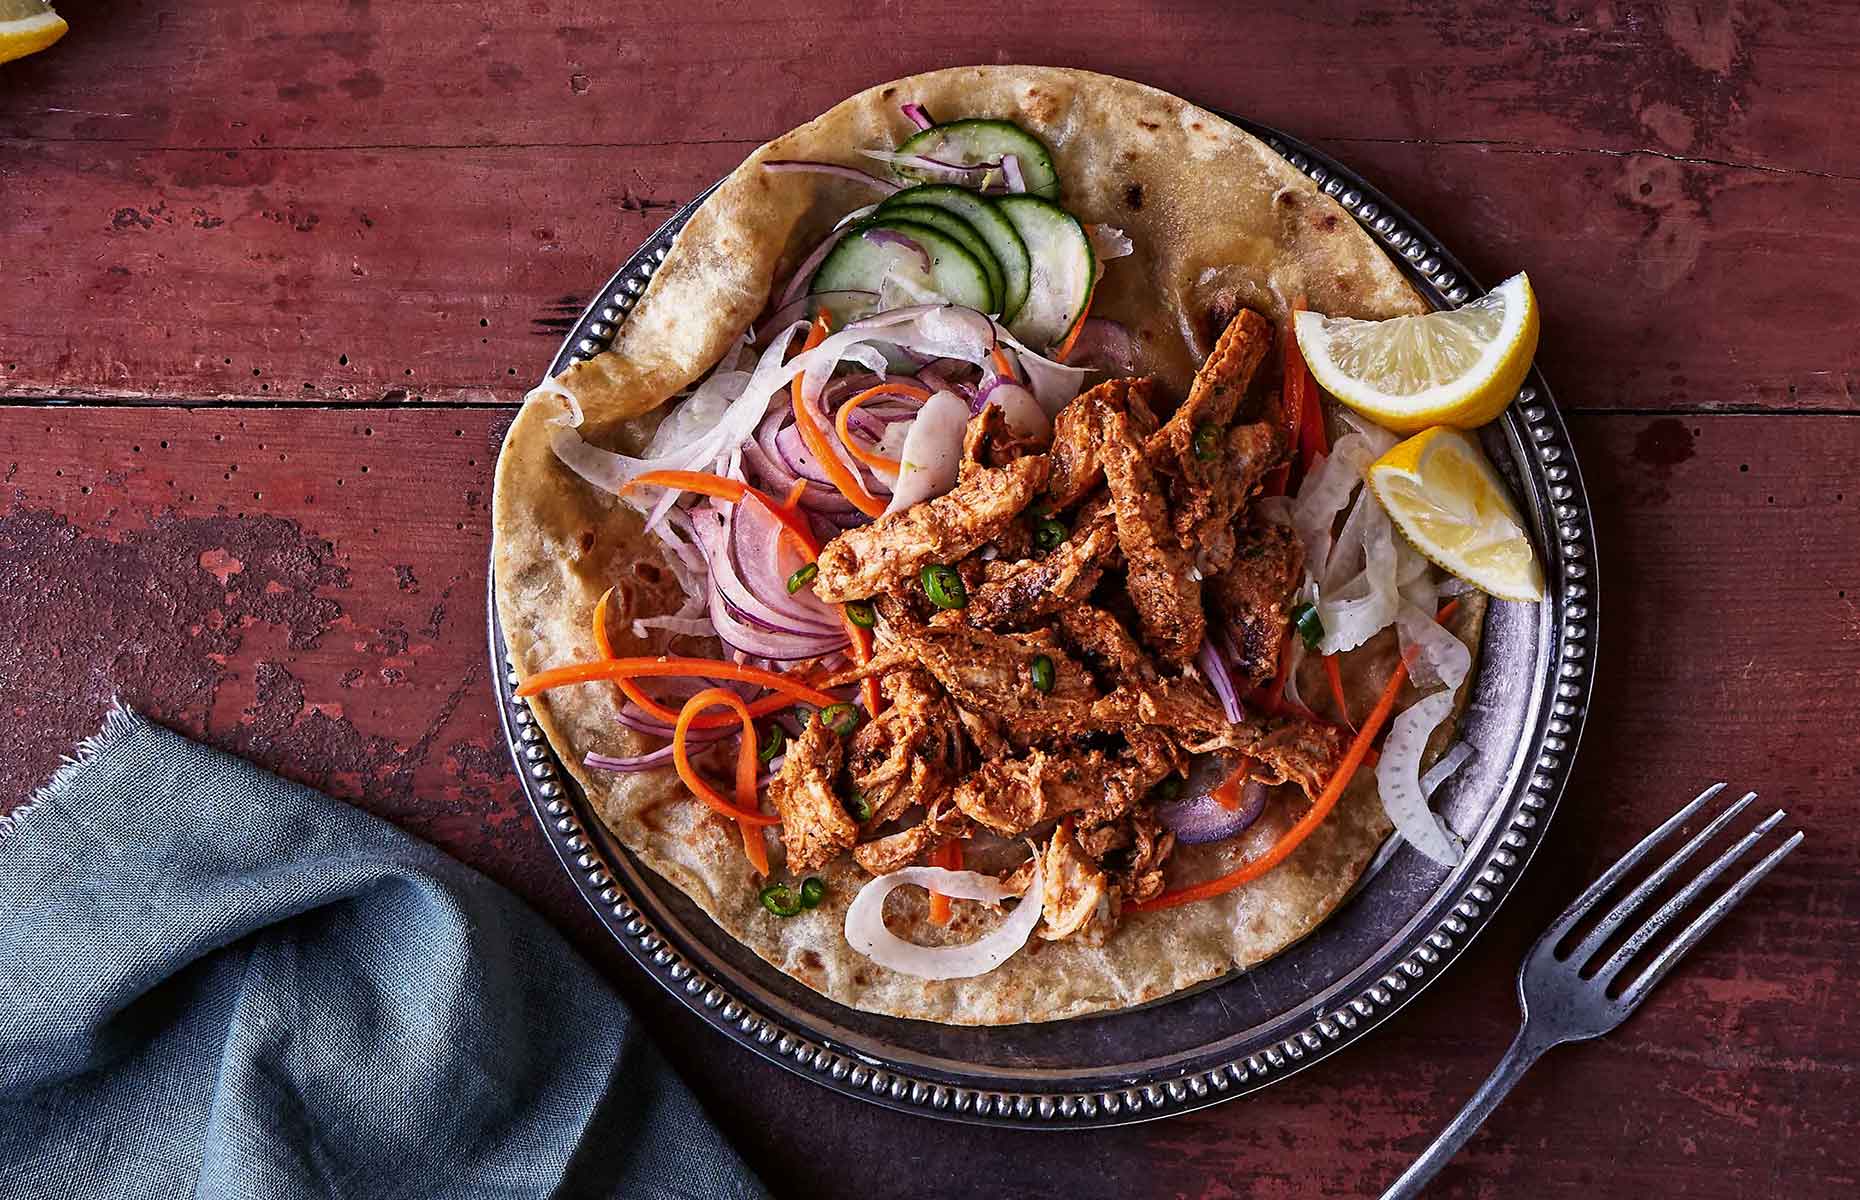 Pulled tandoori spiced chicken (Image by Nassima Rothacker)